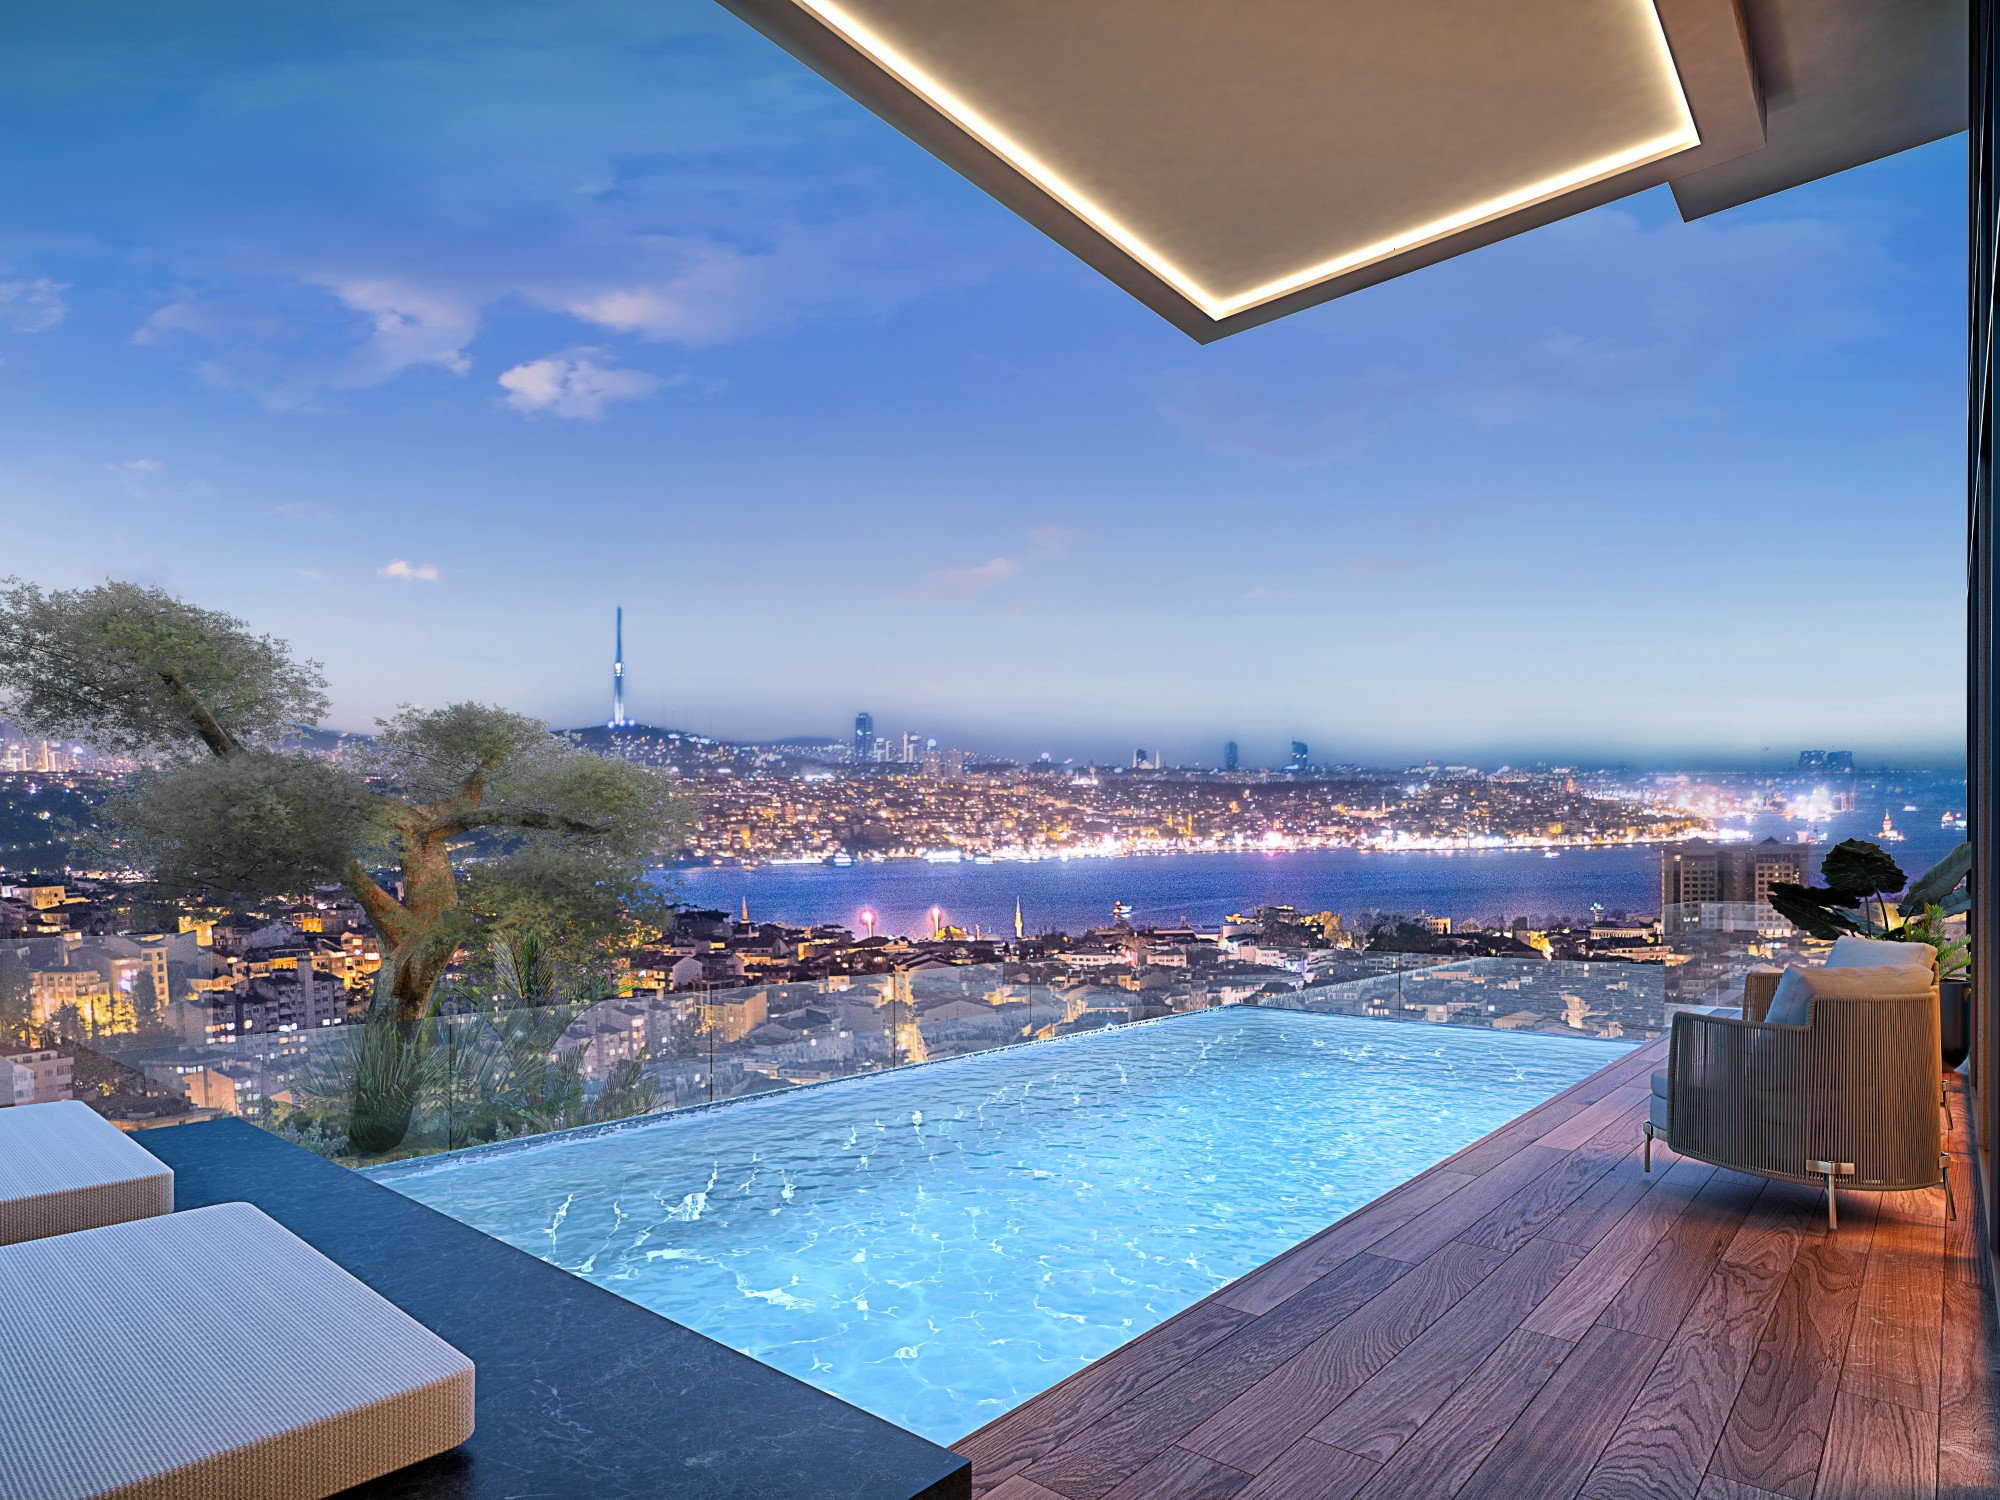 Residential Project in the Heart of Istanbul within the Nisantasi , One of the Finest Centers of Contemporary Commercial and Social Life in Turkey